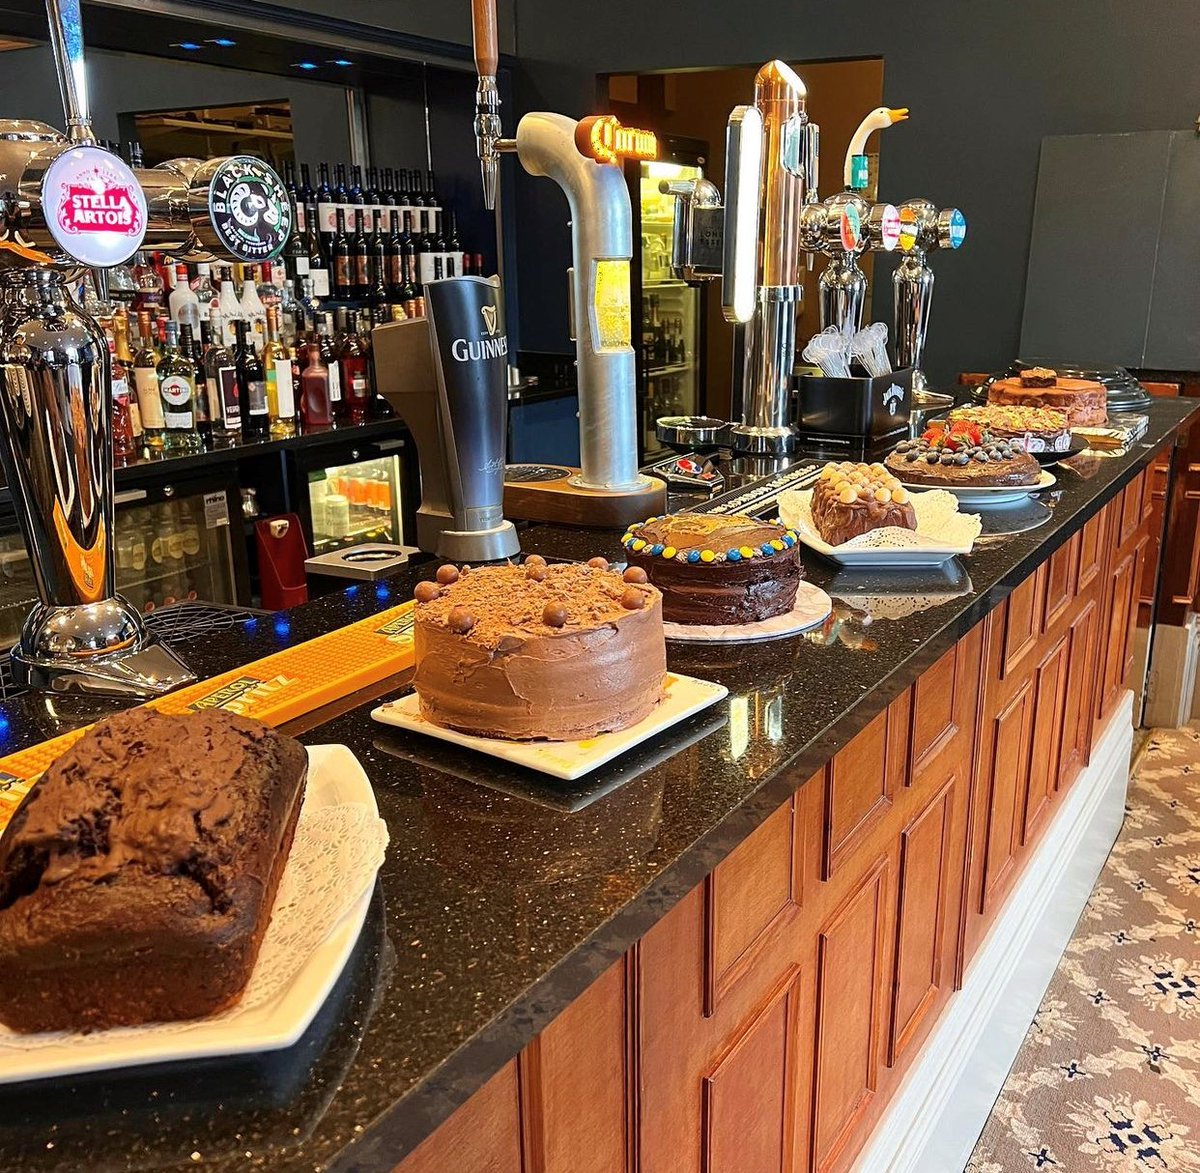 We are officially caked out!🥮 The whole team got involved in some fun competition for National Chocolate Cake Day! #NationalChocolateCakeDay #harrogate #chocolatecake #chocolatecakeday